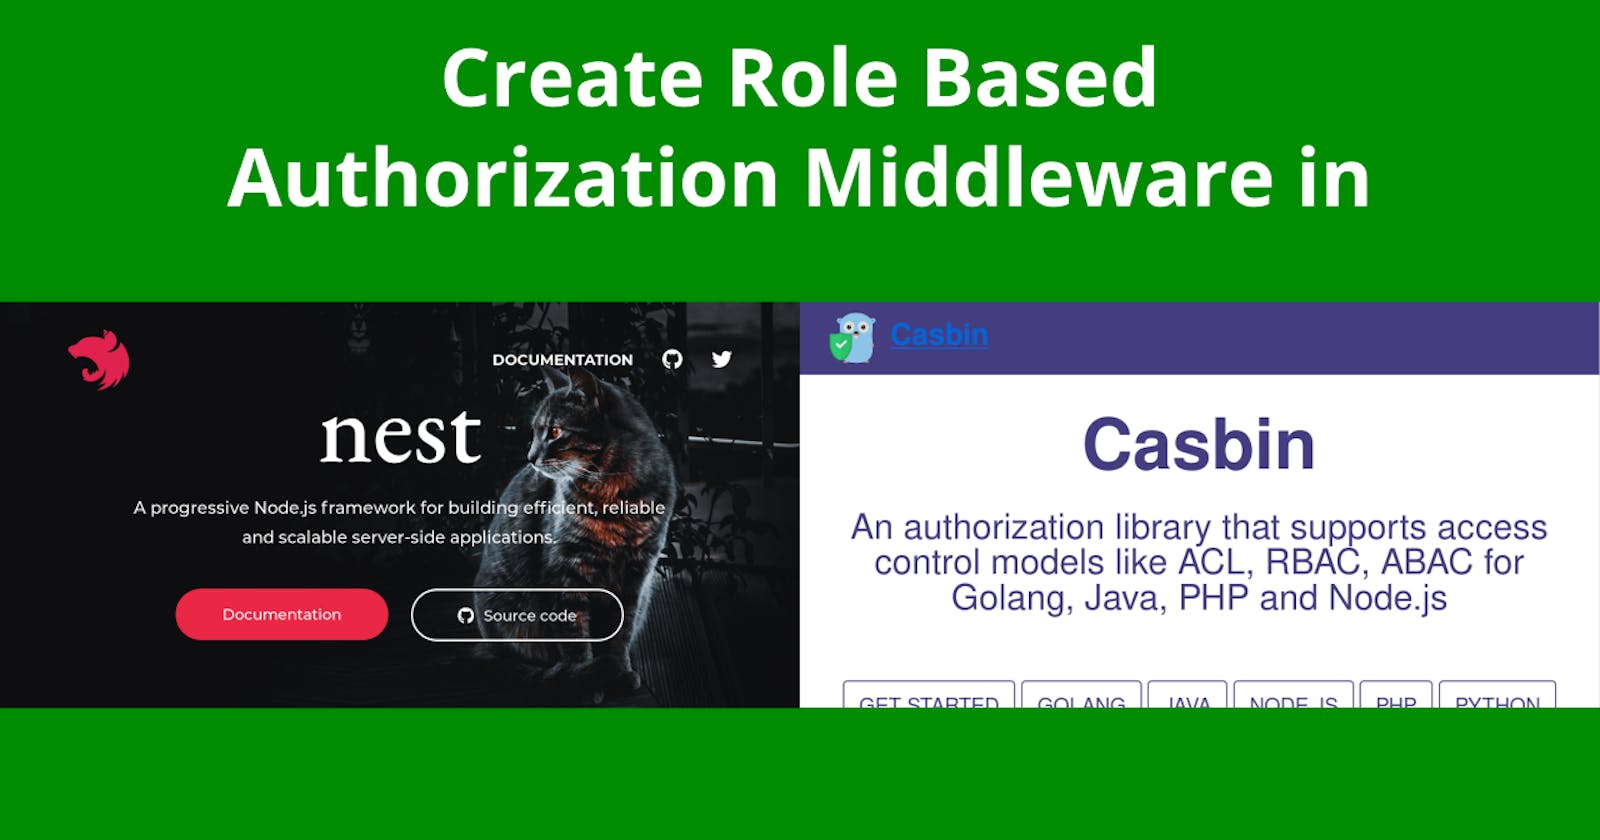 How to Create Role based Authorization Middleware with Casbin and Nest.js